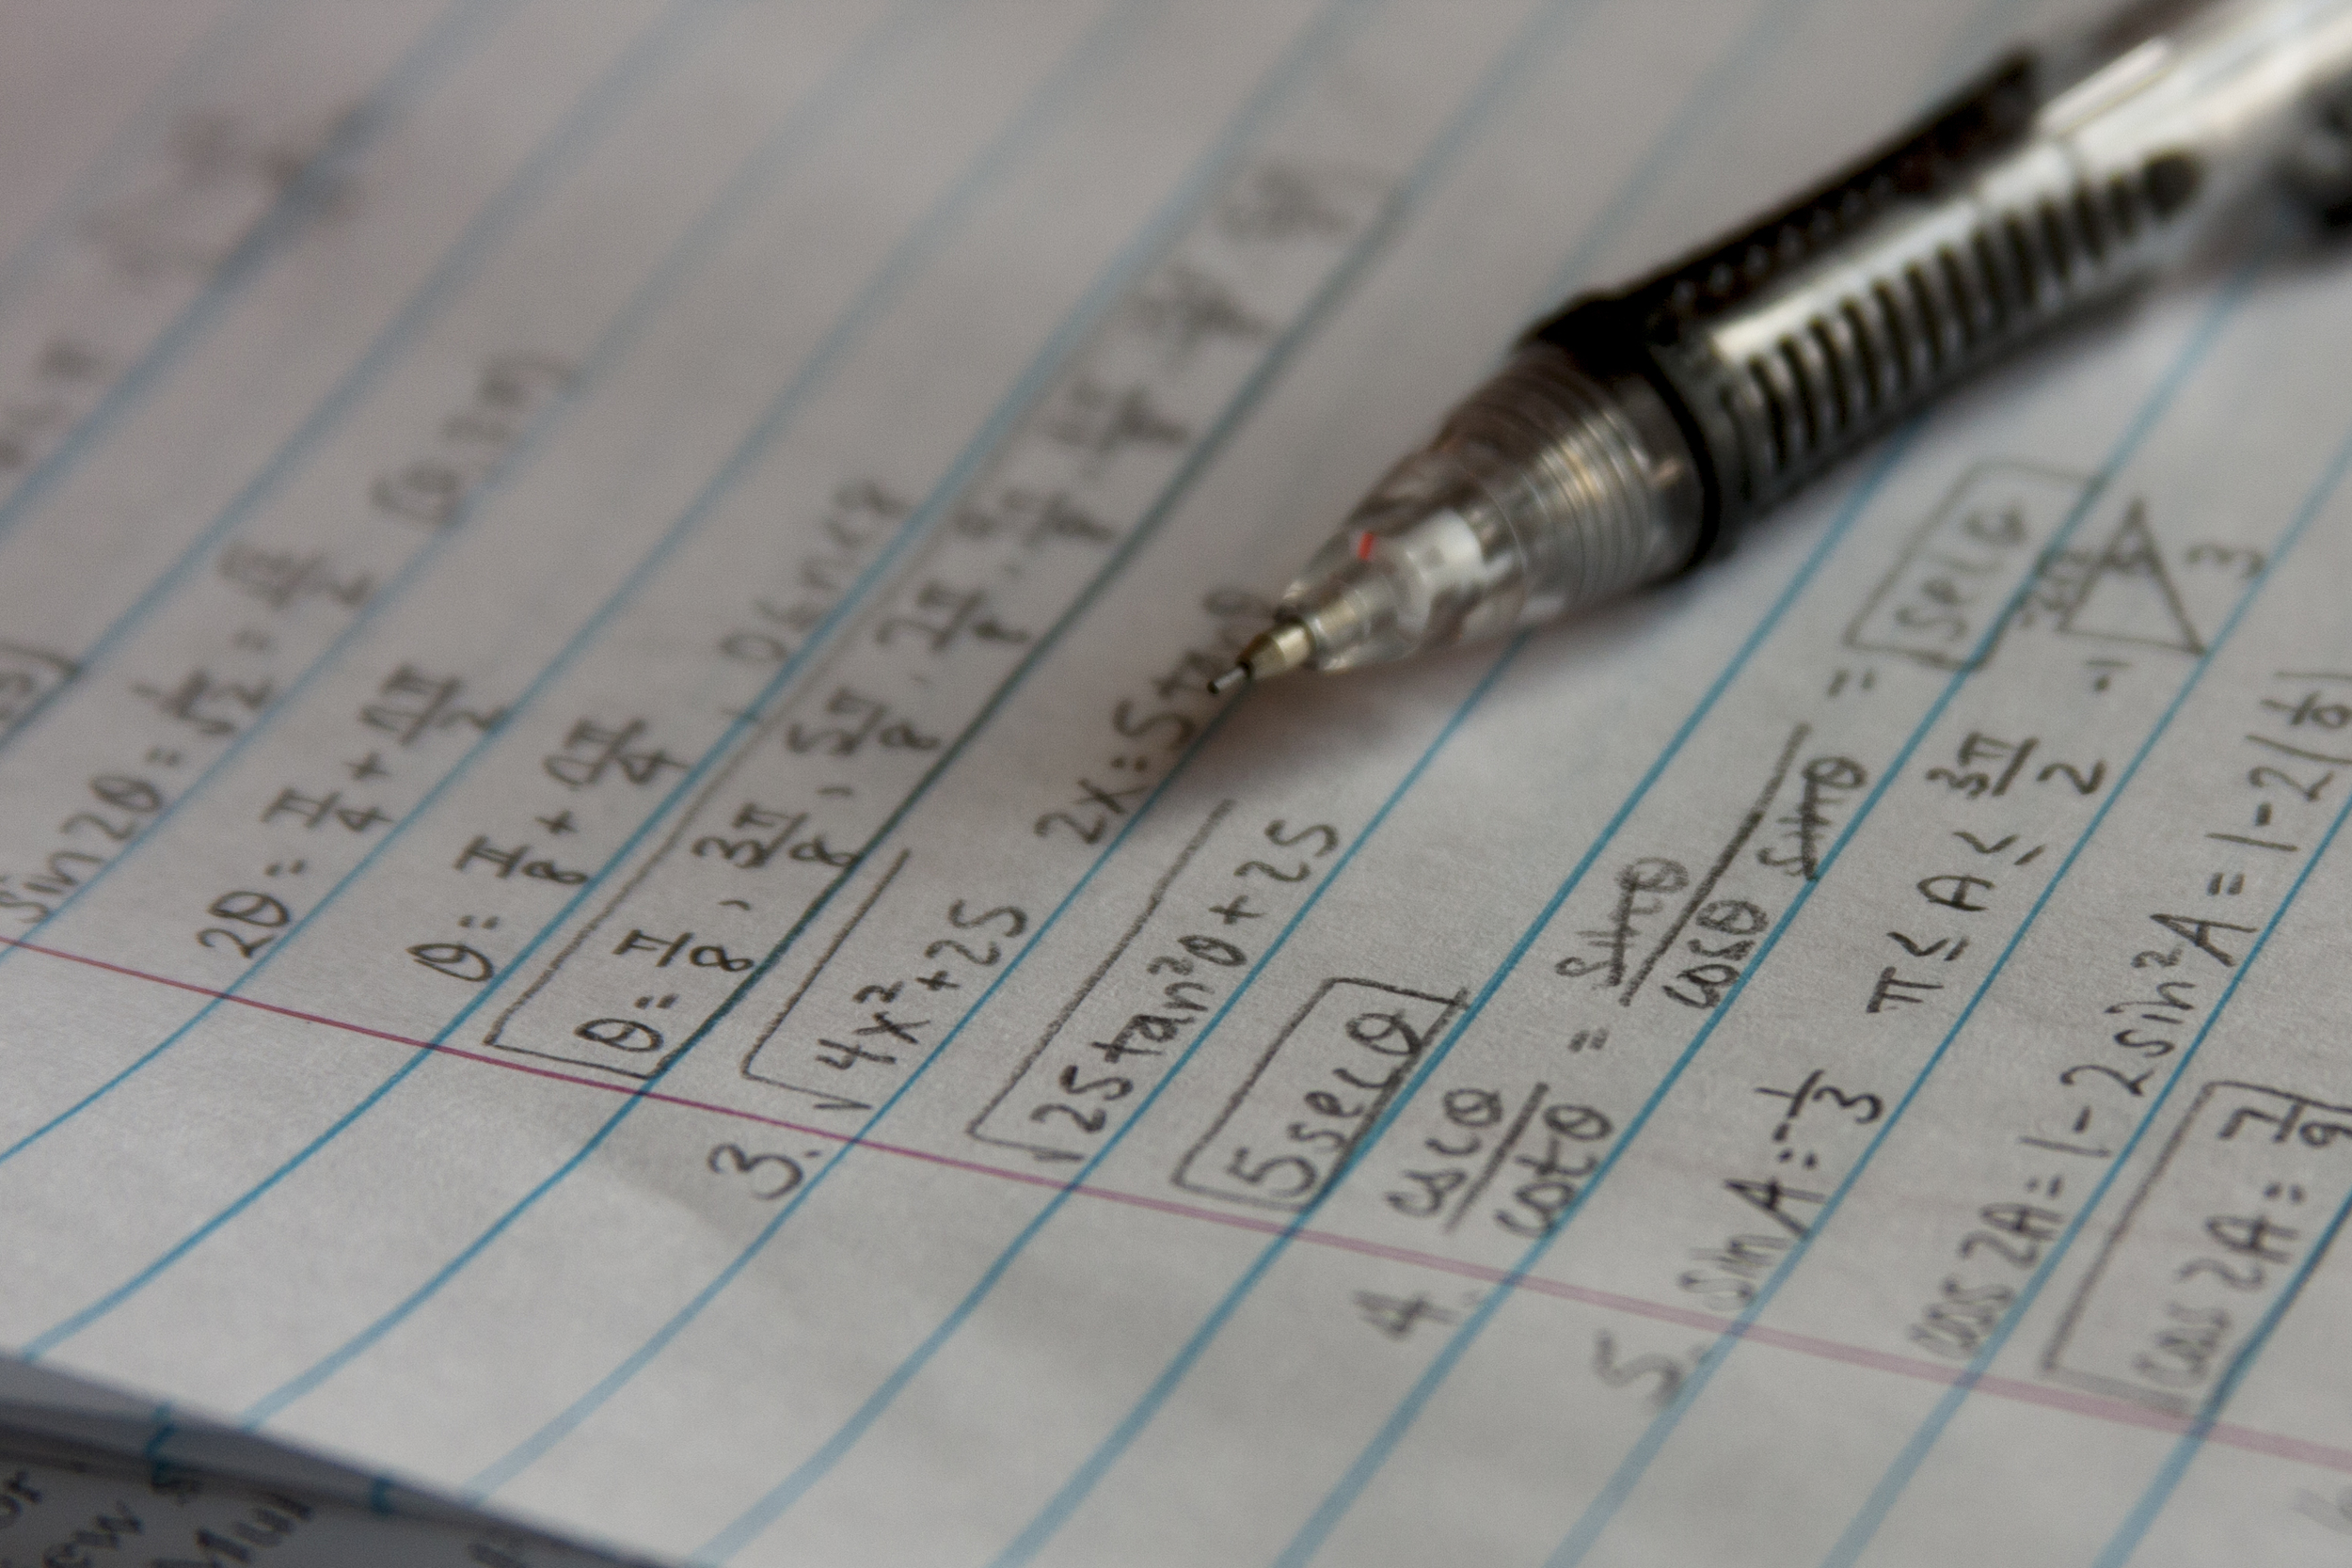 A pen lying on a paper surface.